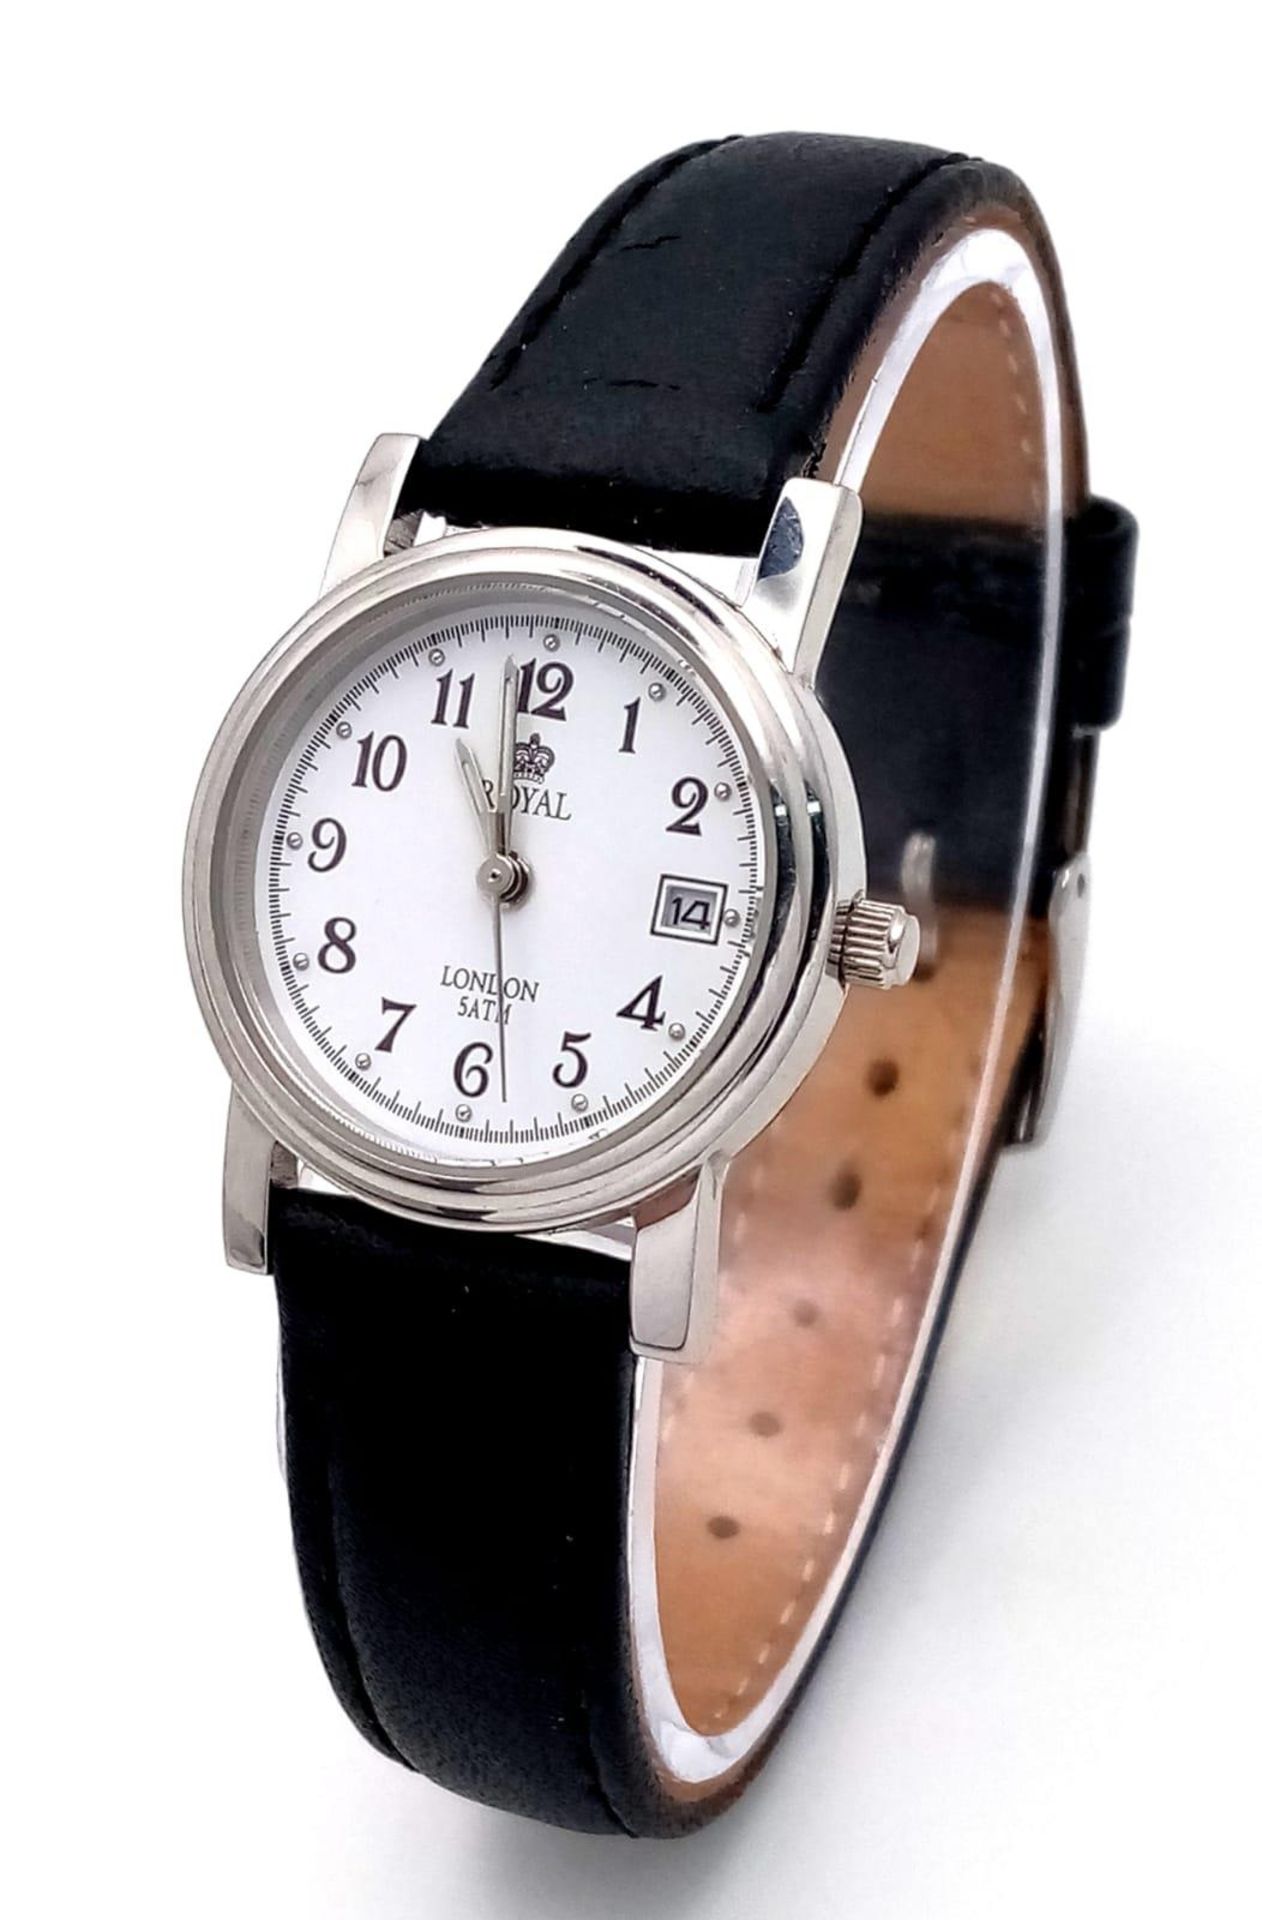 A Ladies Royal London Quartz Watch. Black leather strap. Stainless steel case - 25mm. White dial